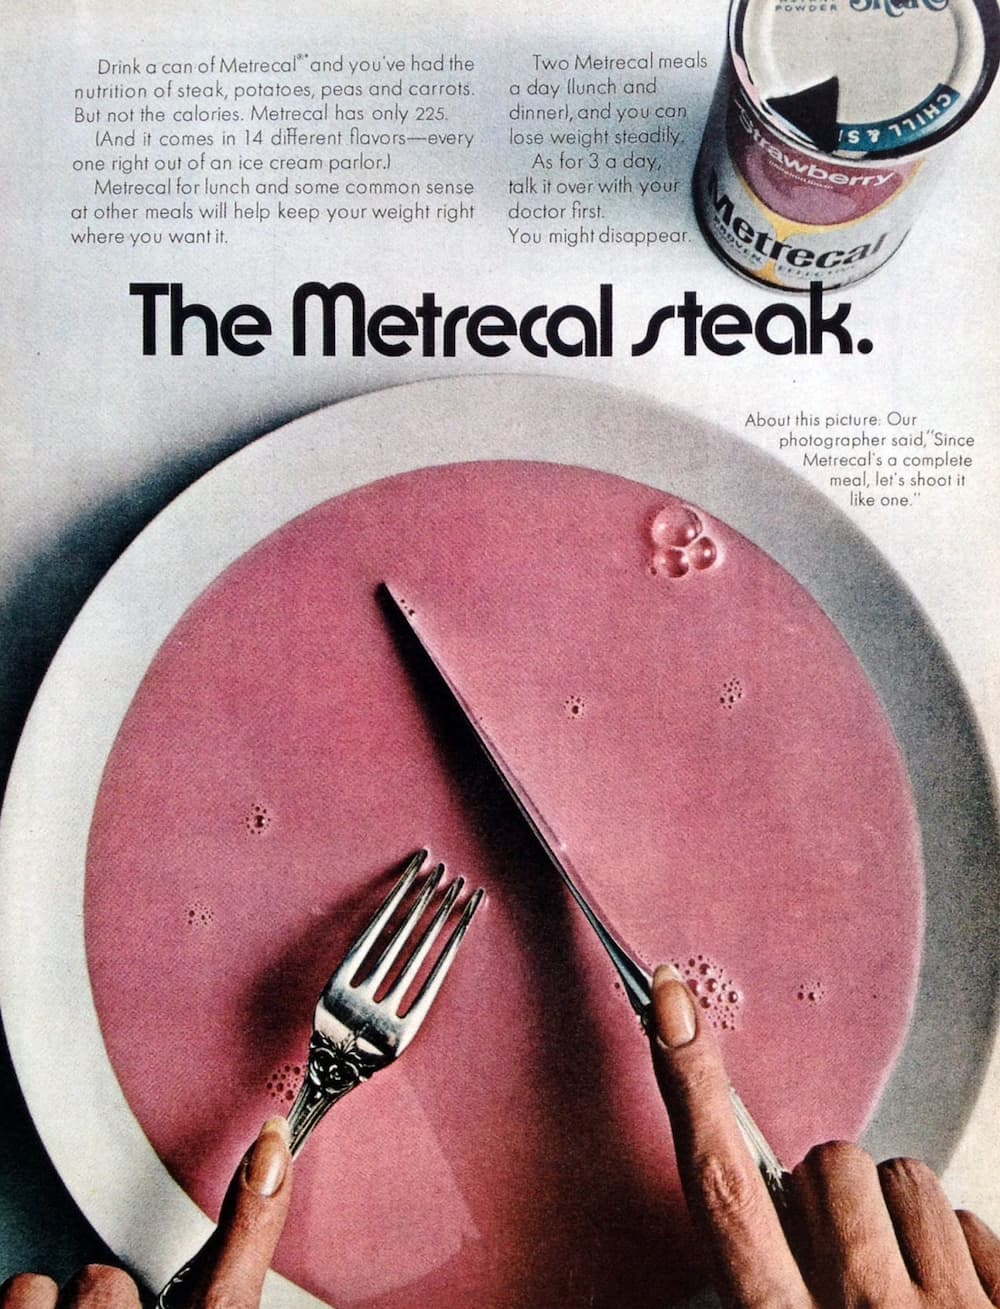 Shake off weight with meal replacement drinks|Metrecal Steak Meal Replacement Ad from the 1960s